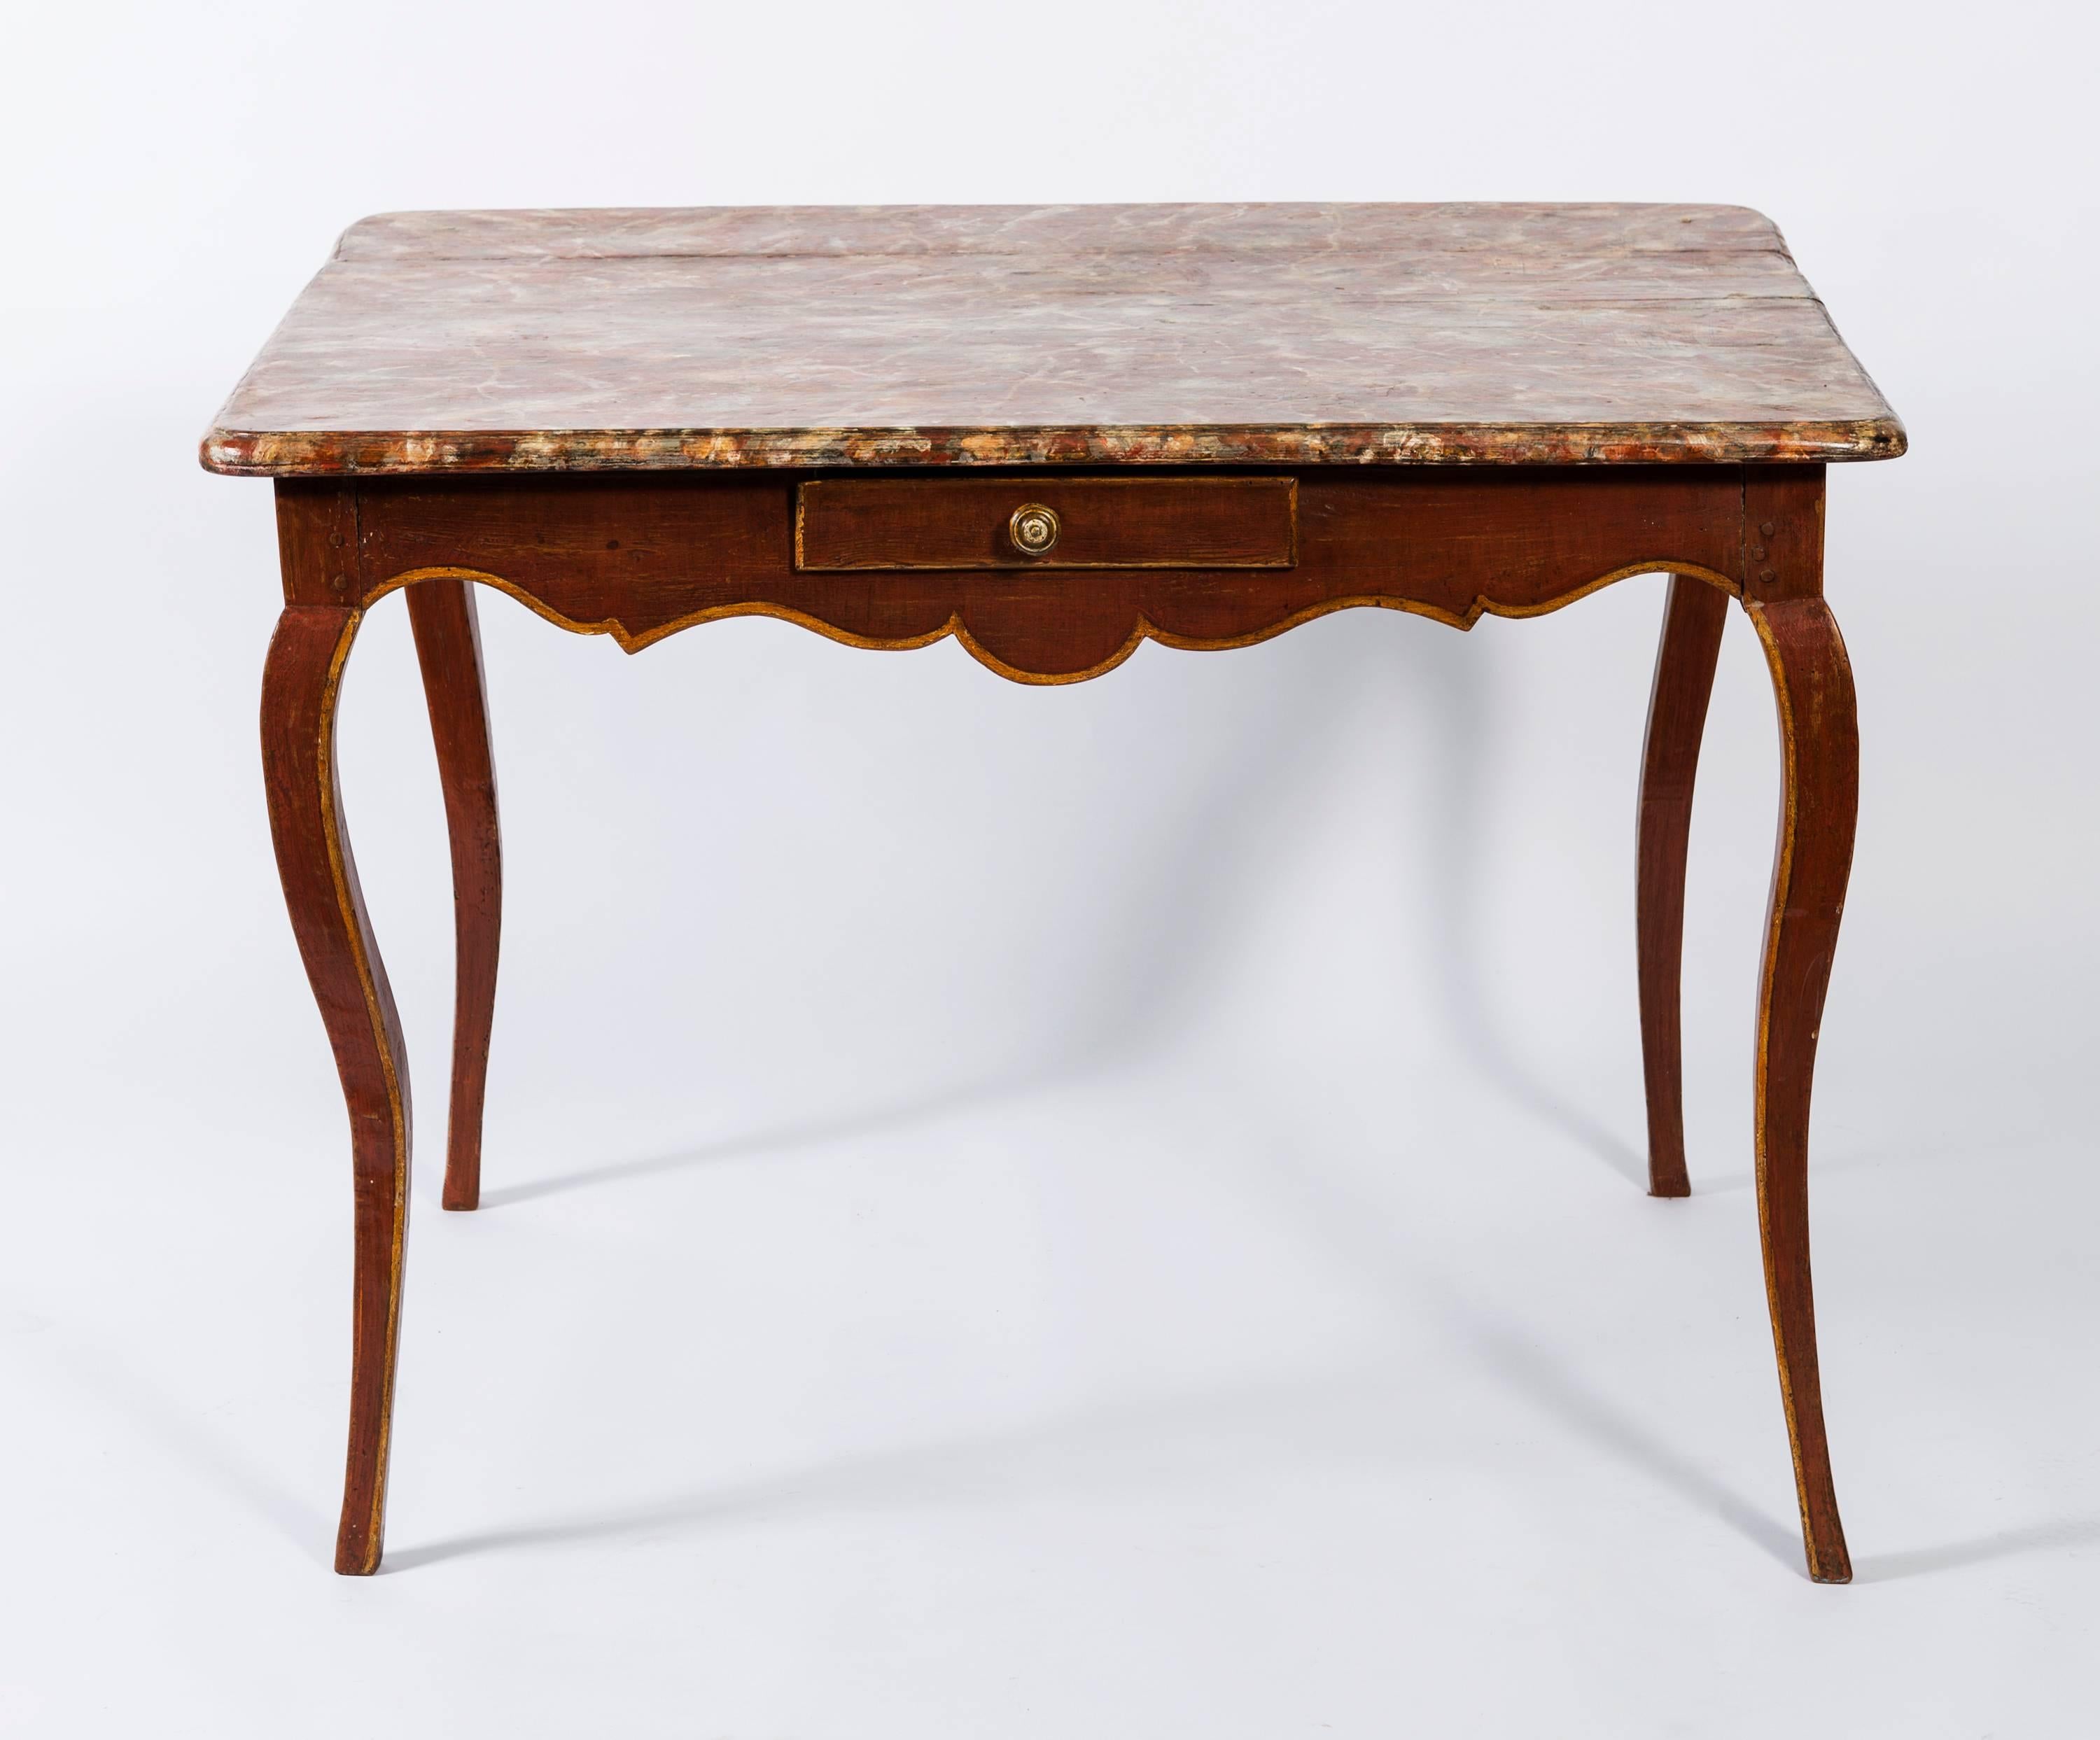 Beautiful 19th century terracotta painted wood rectangular table with faux marble top in complementary colors with a beveled edge. The center table is finished on all four sides and has cabriole legs. The apron is in a scroll pattern outlined on the